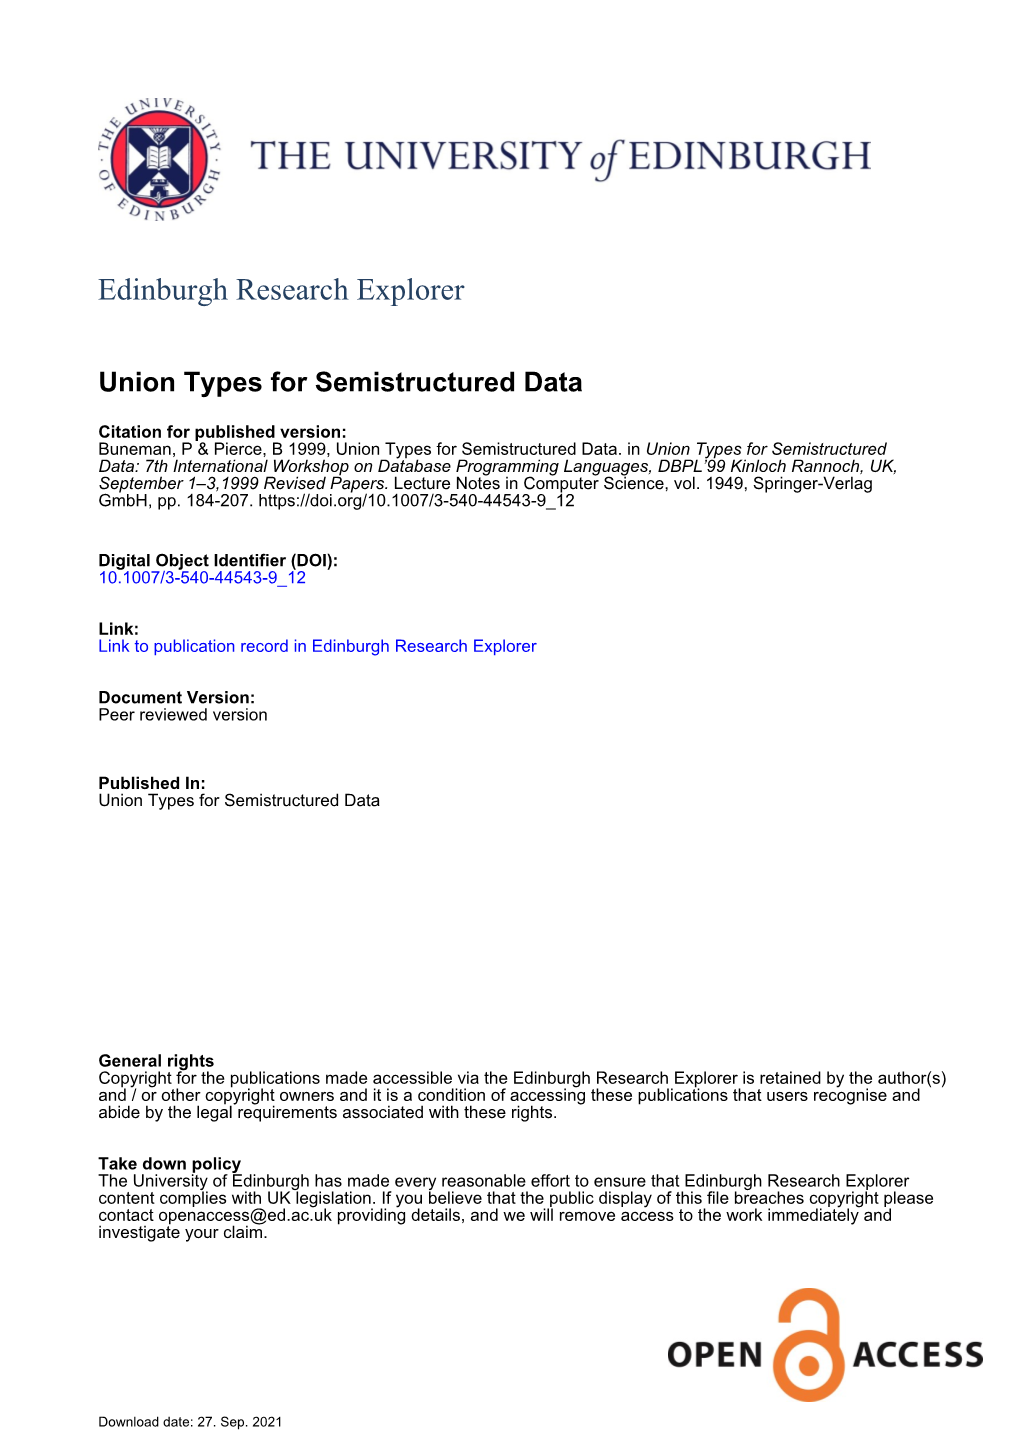 Union Types for Semistructured Data